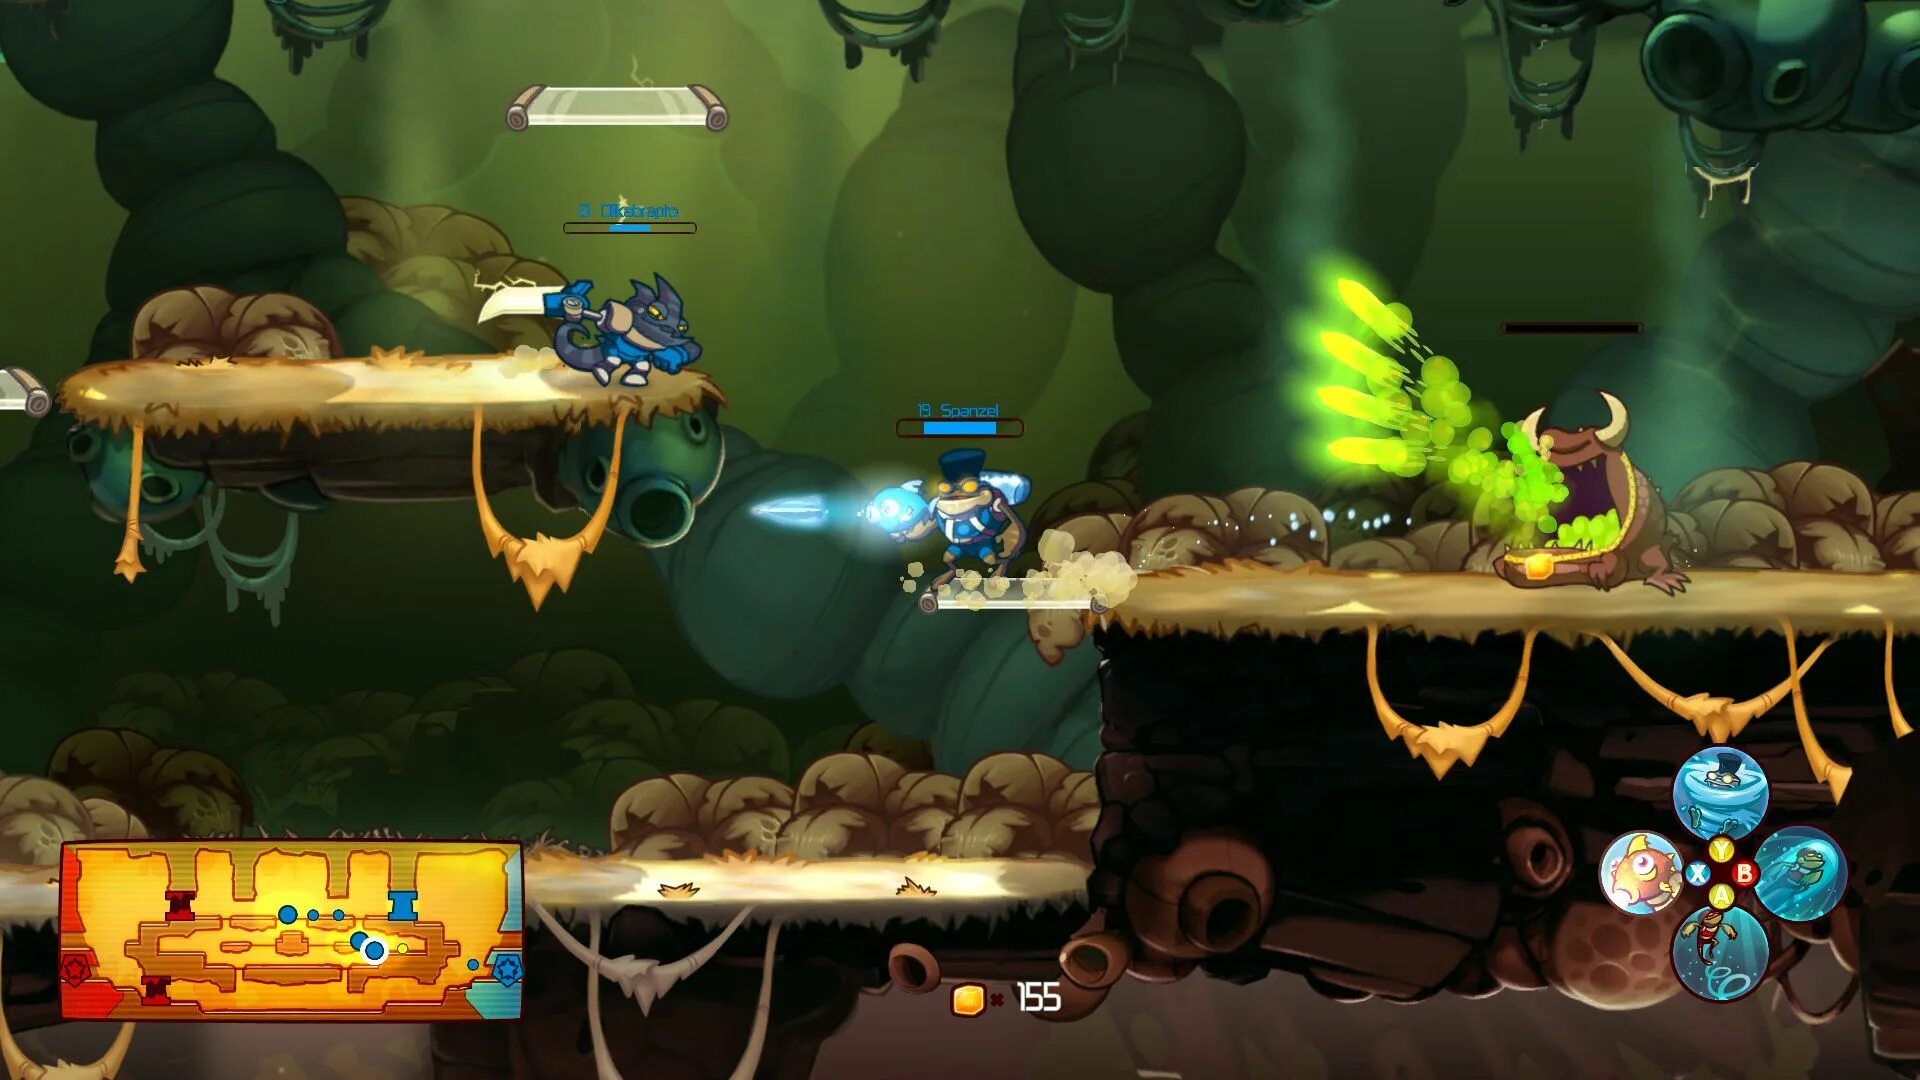 2d games download. PS one платформер. Awesomenauts ps3. Awesomenauts герои. 2d игры Xbox Arcada.